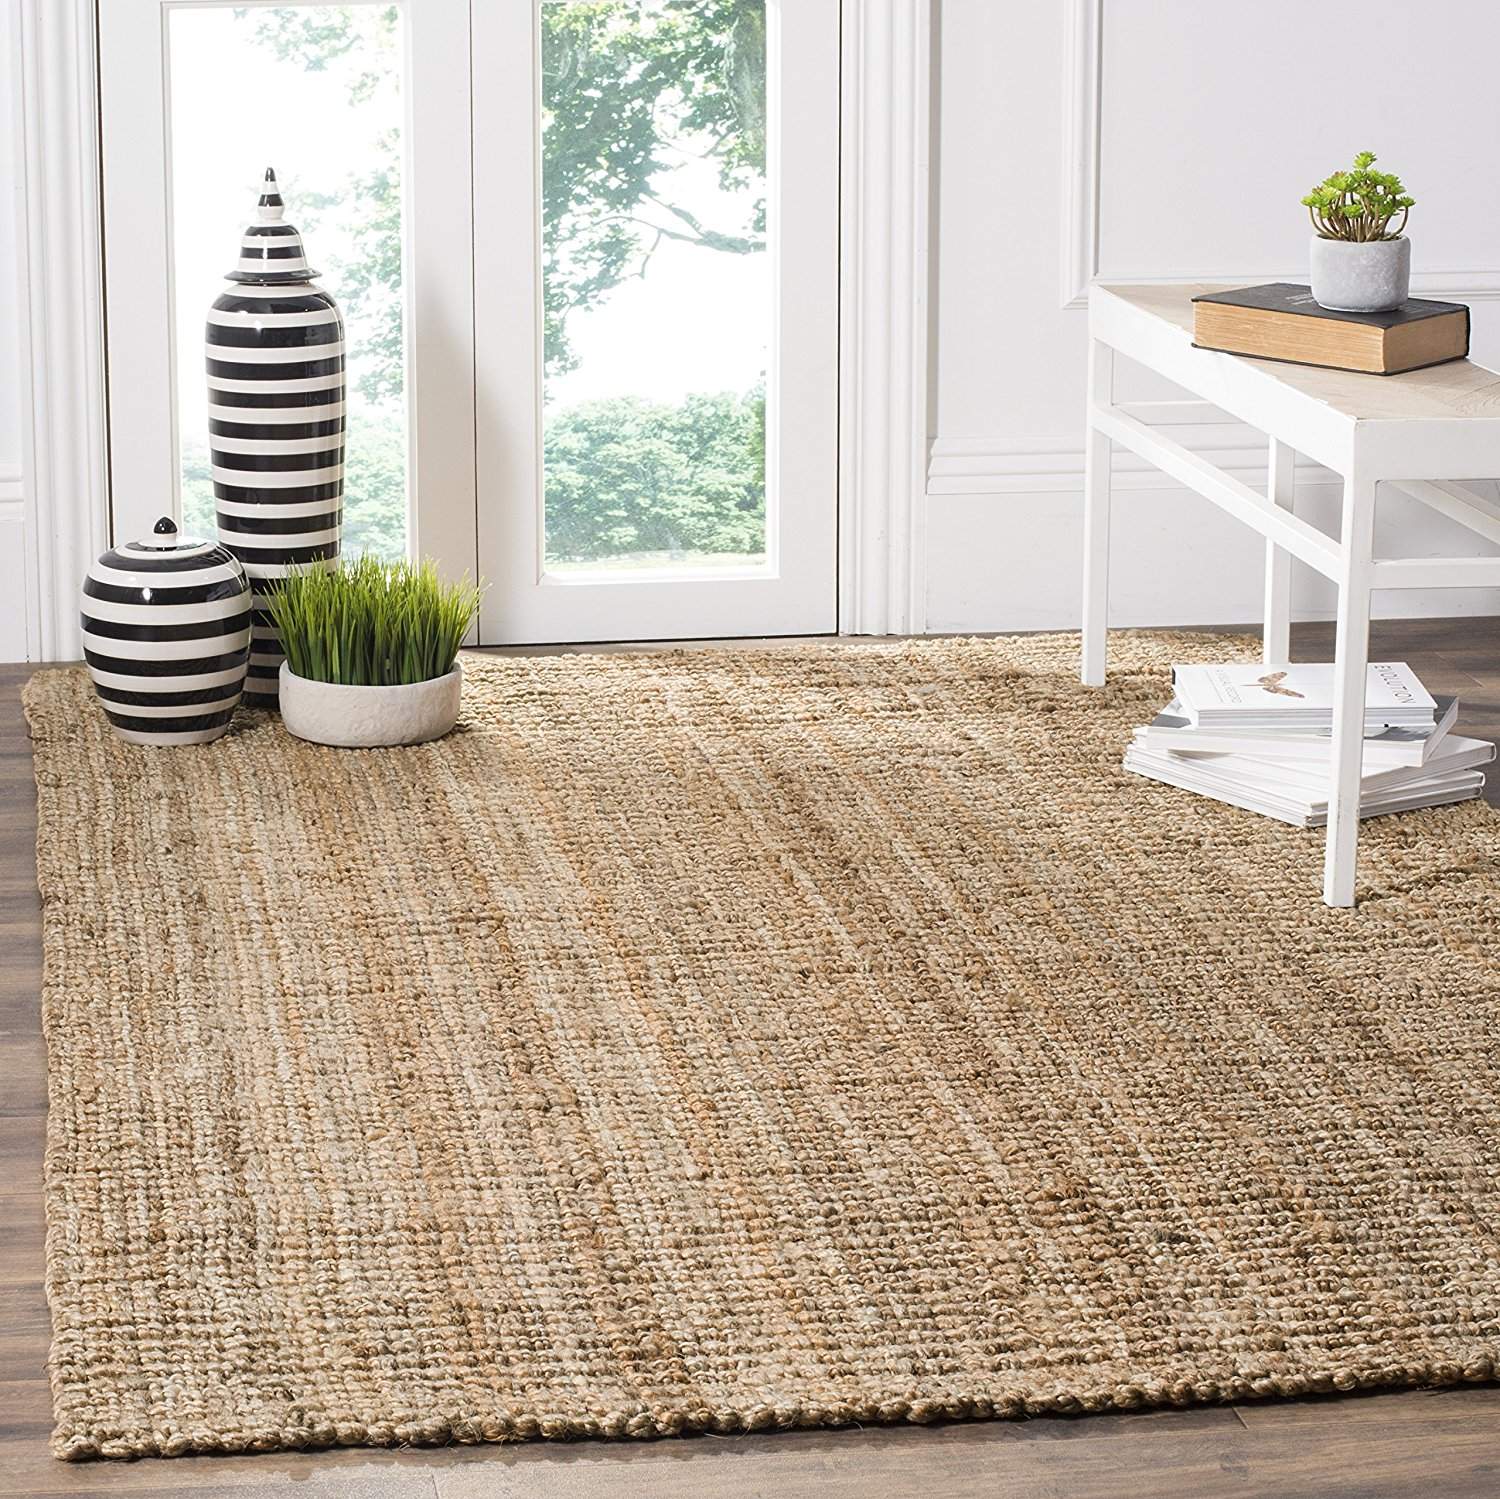 I am drooling over all of the texture in these natural fiber rugs!